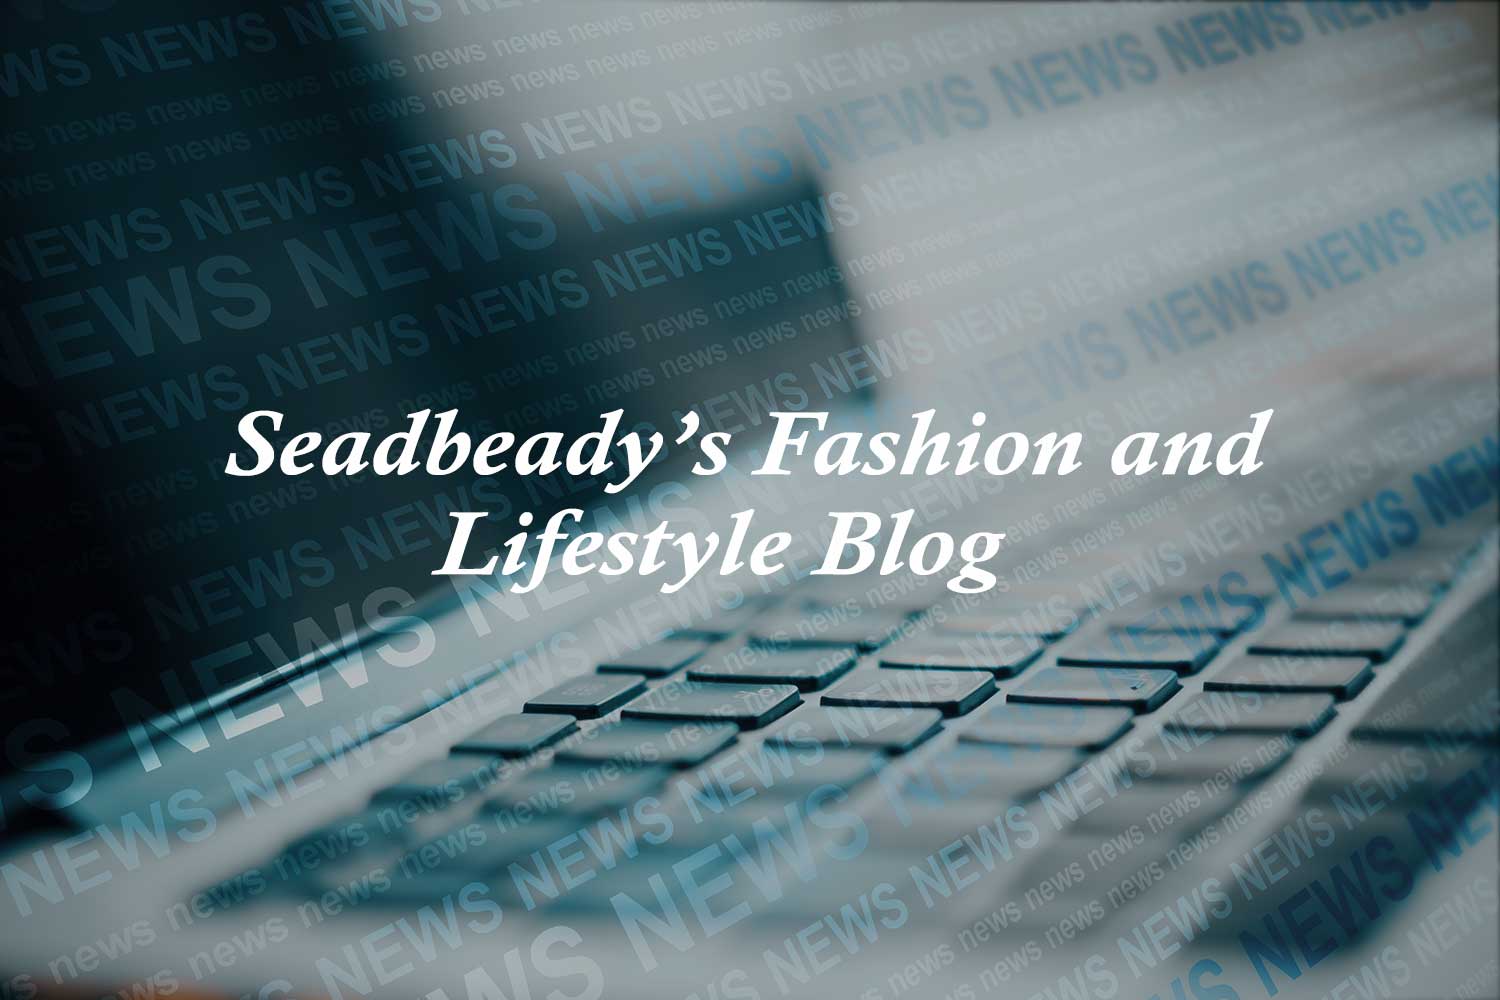 Seadbeady's Fashion and Lifestyle Blog: Great Gifts for Women